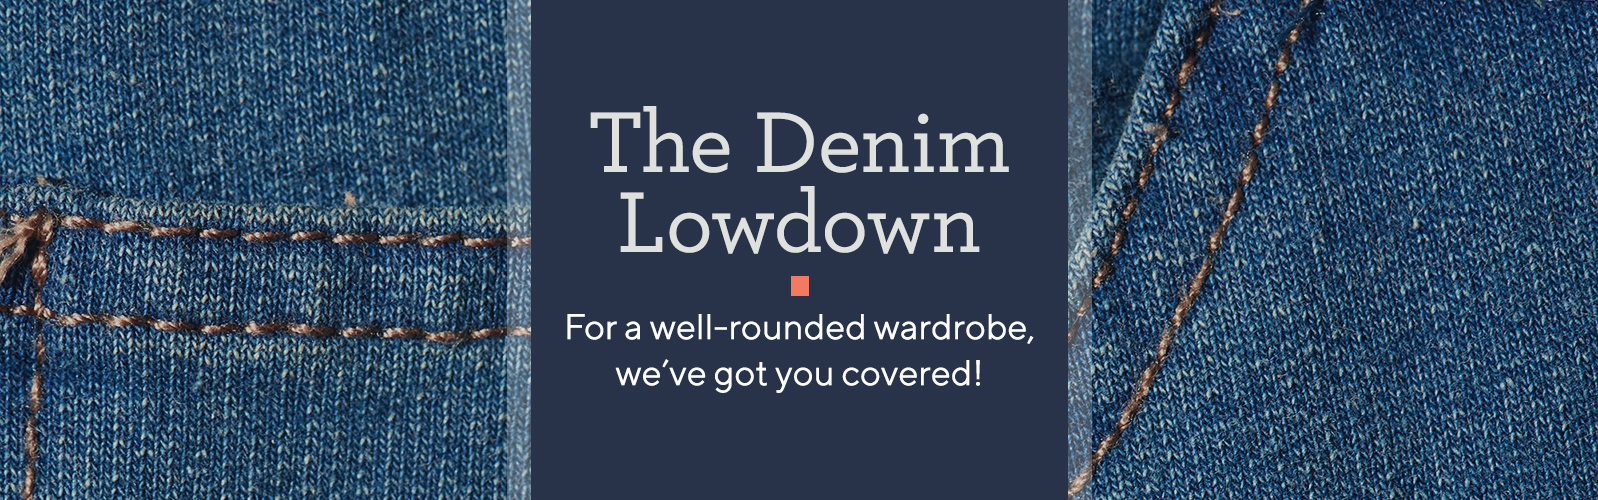 The Denim Lowdown For a well-rounded wardrobe, we've got you covered!